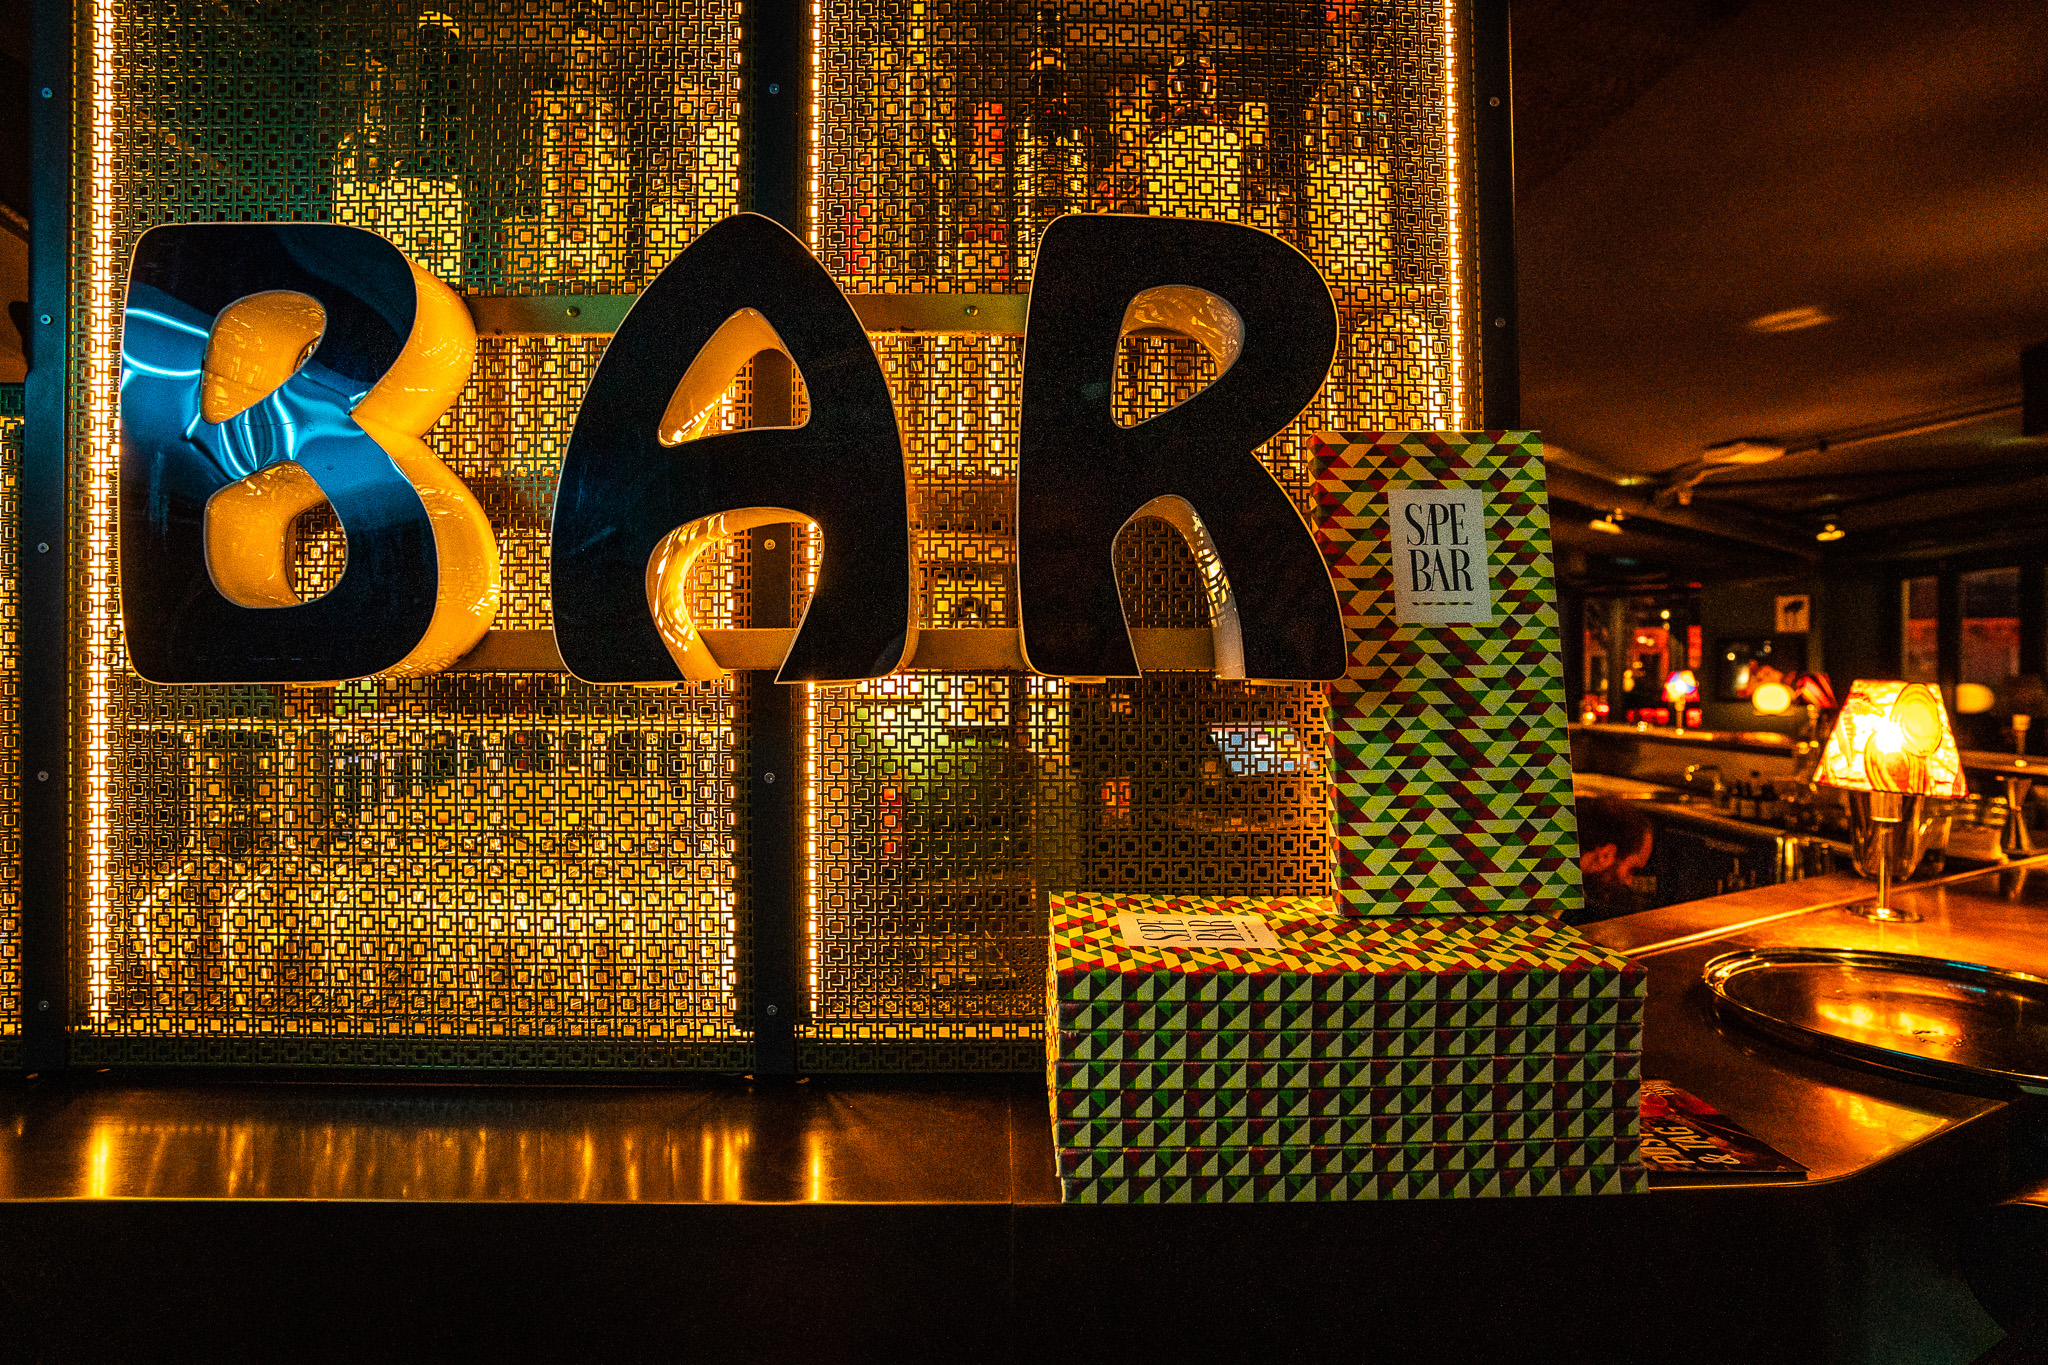 A sign with bold letters spelling out "BAR" at the counter of the Sape Bar